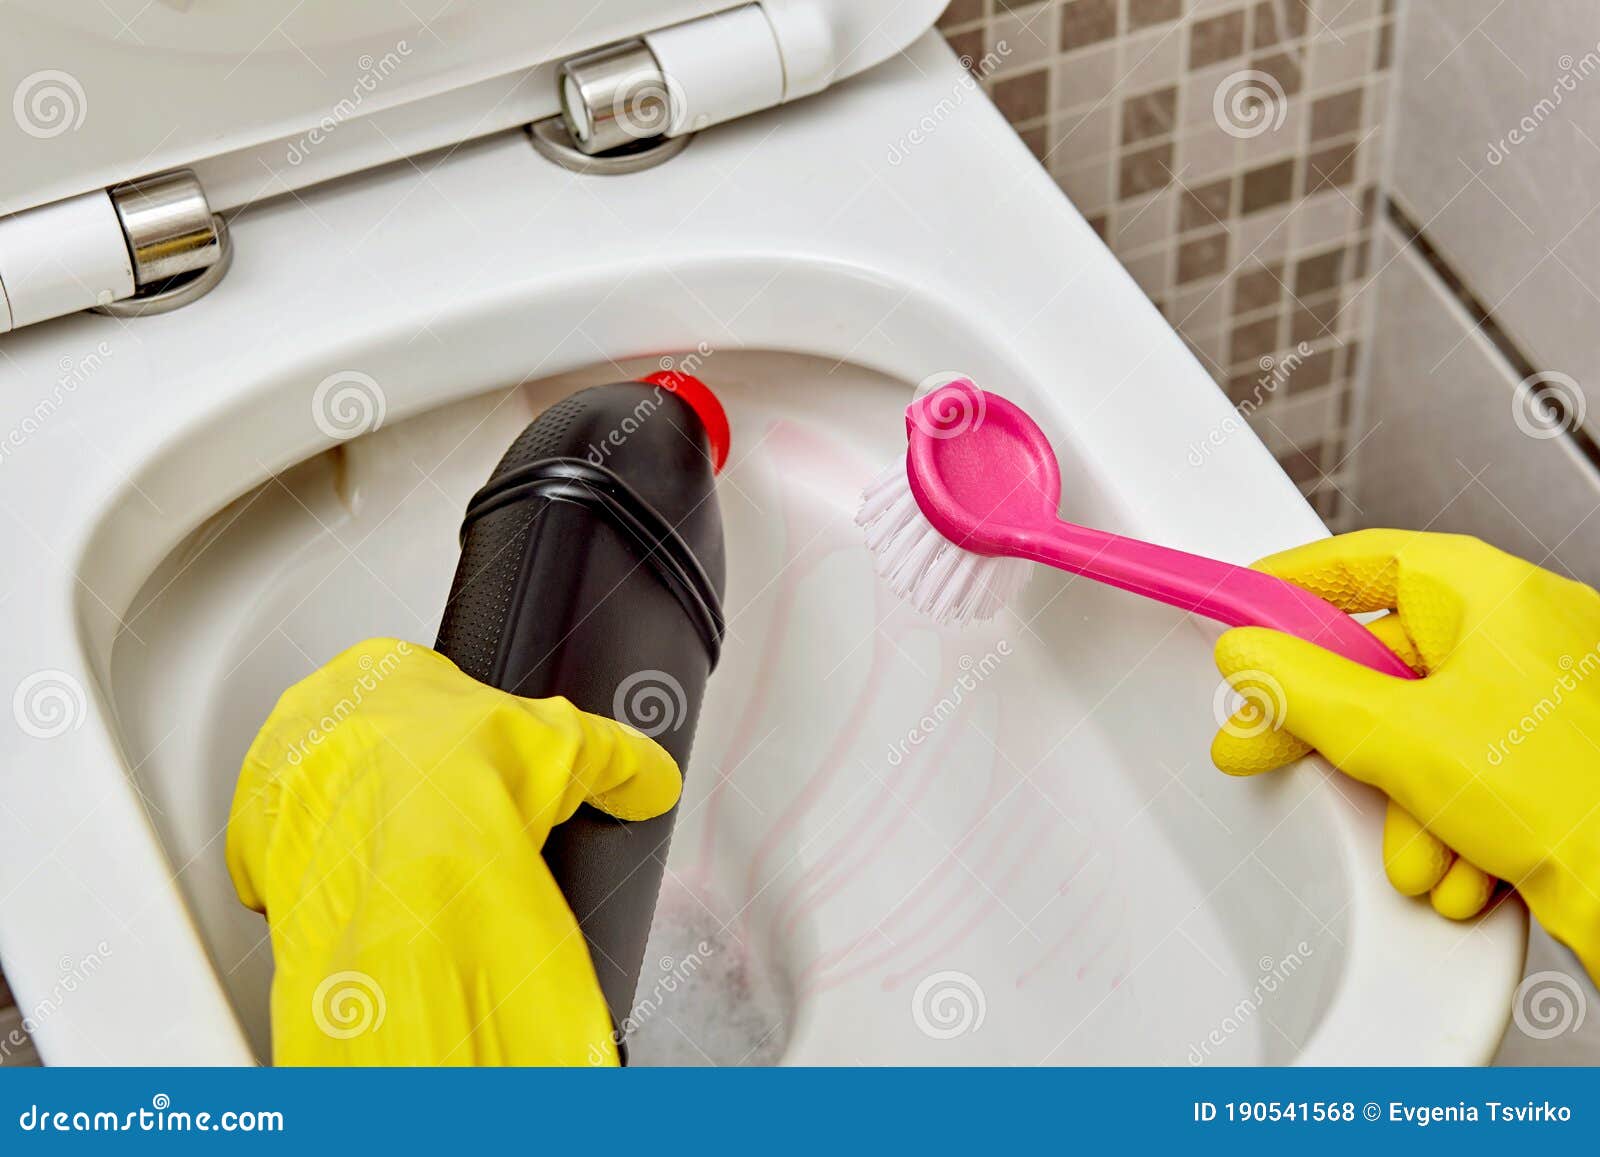 Bathroom Cleaning by a Professional Cleaner. Rubber Gloves for Cleaning.  Stock Photo - Image of latex, indoor: 190541568